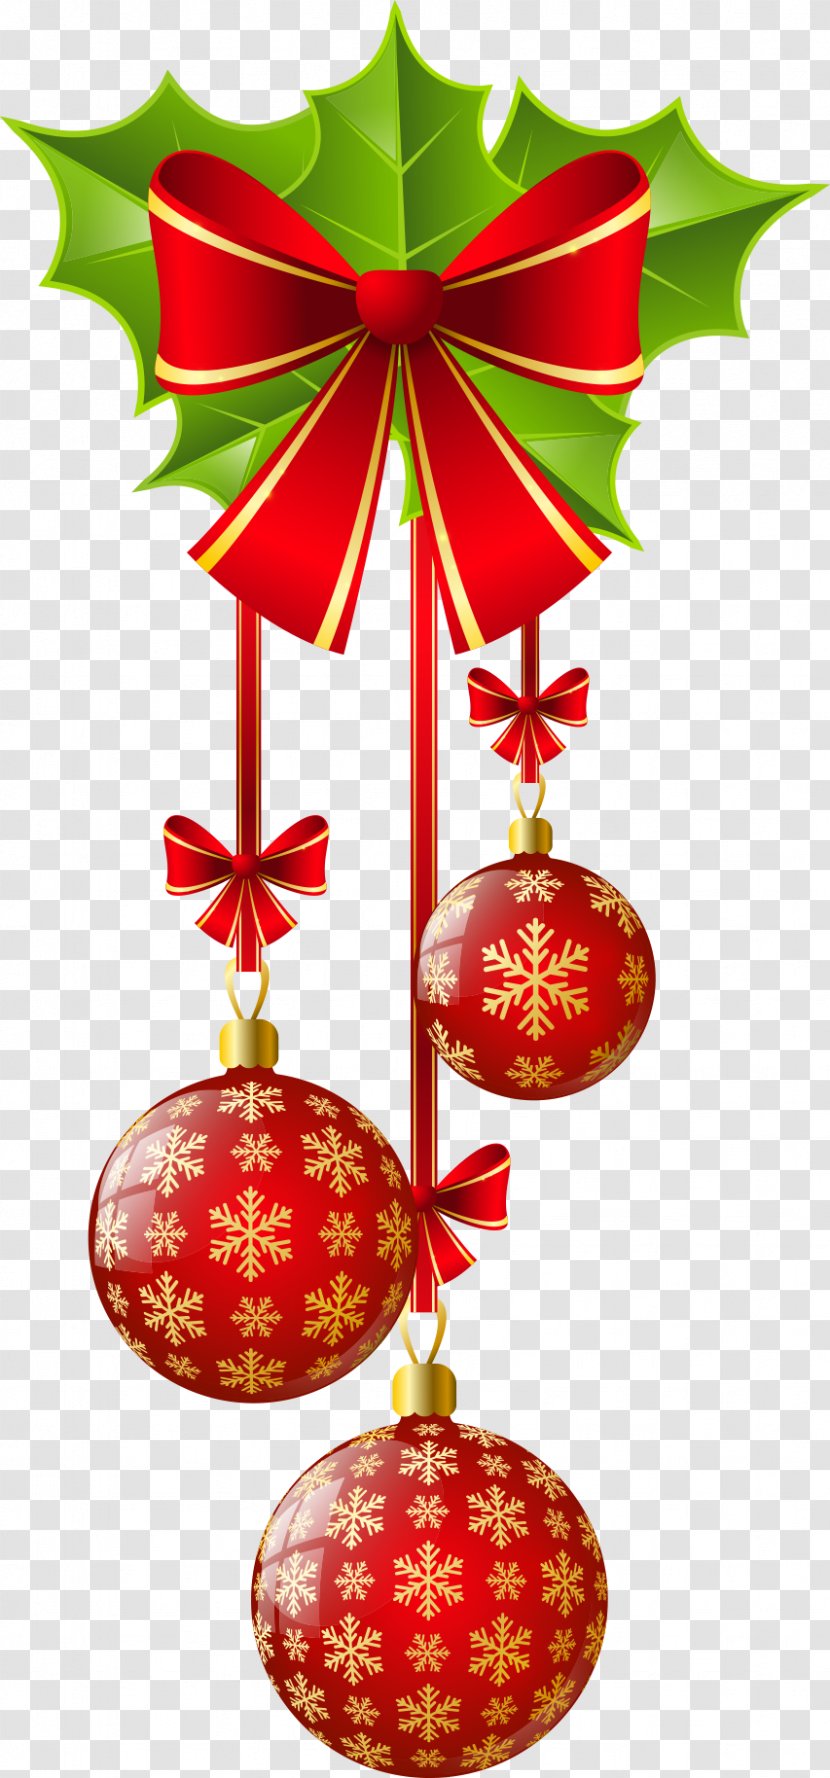 Christmas Ornament Decoration Clip Art - Bombka - Red Bow And Balls Transparent PNG